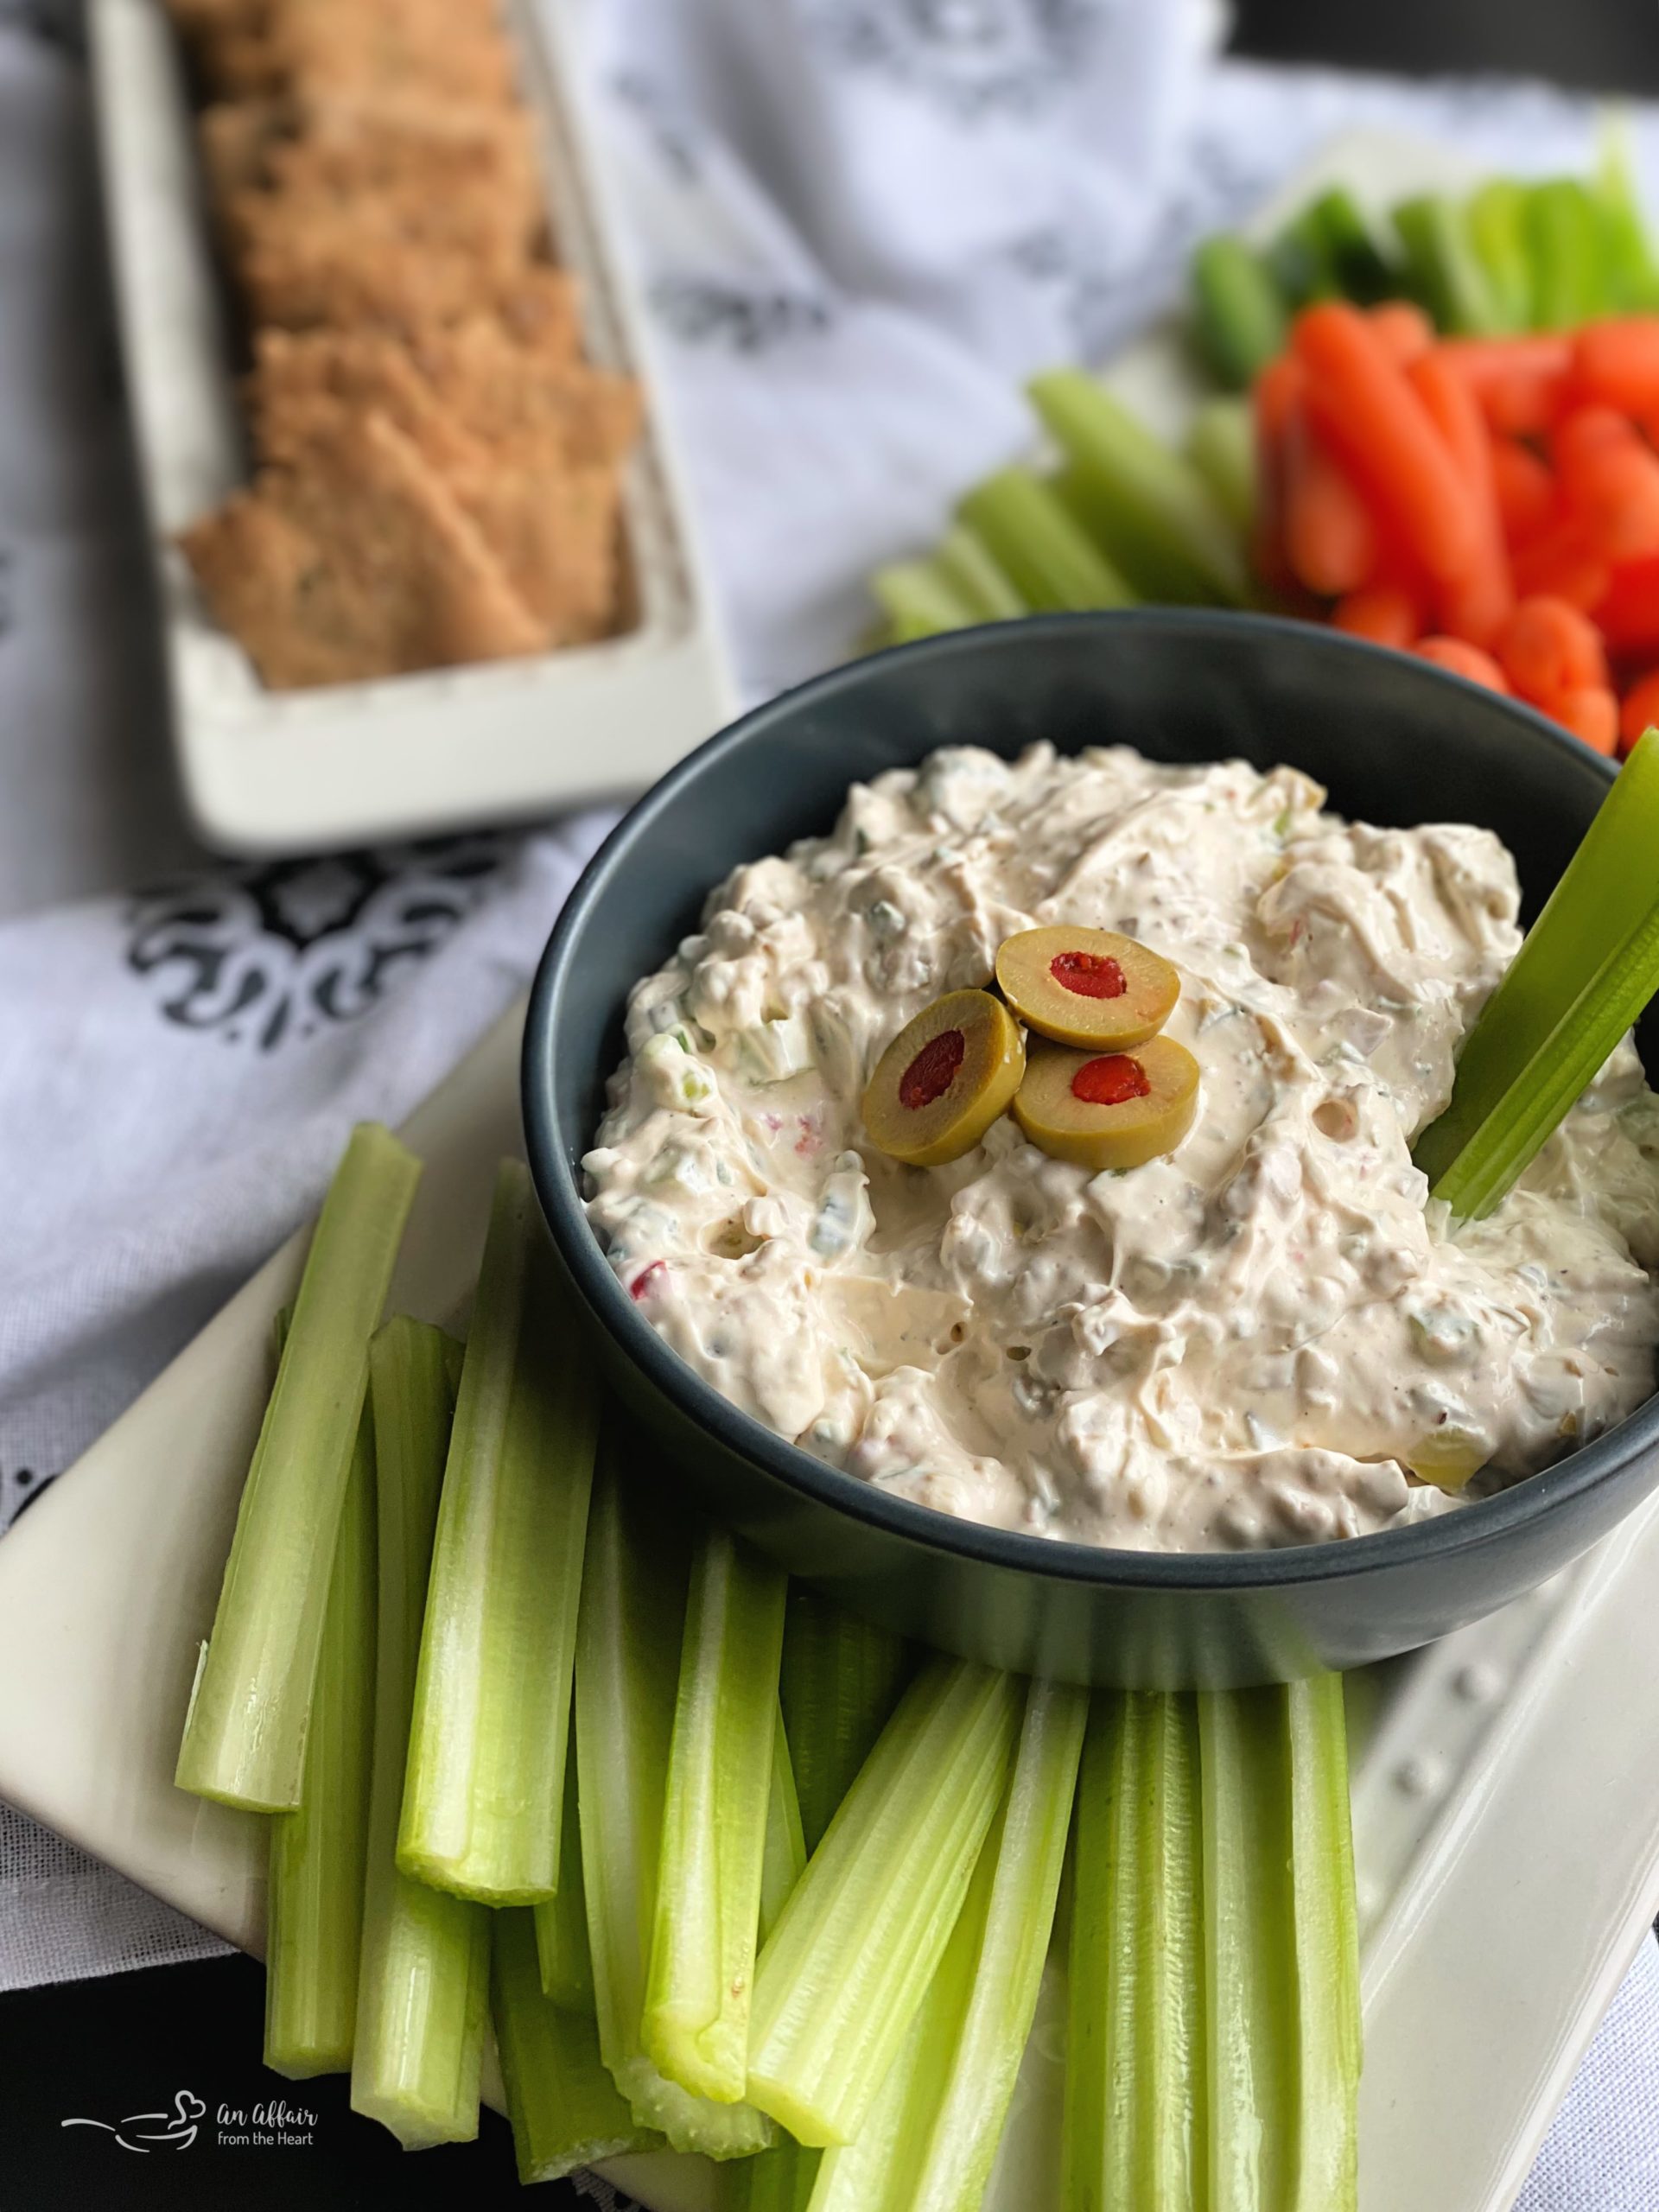 Olive Dip (Old Fashioned Stuffed Celery Dip)